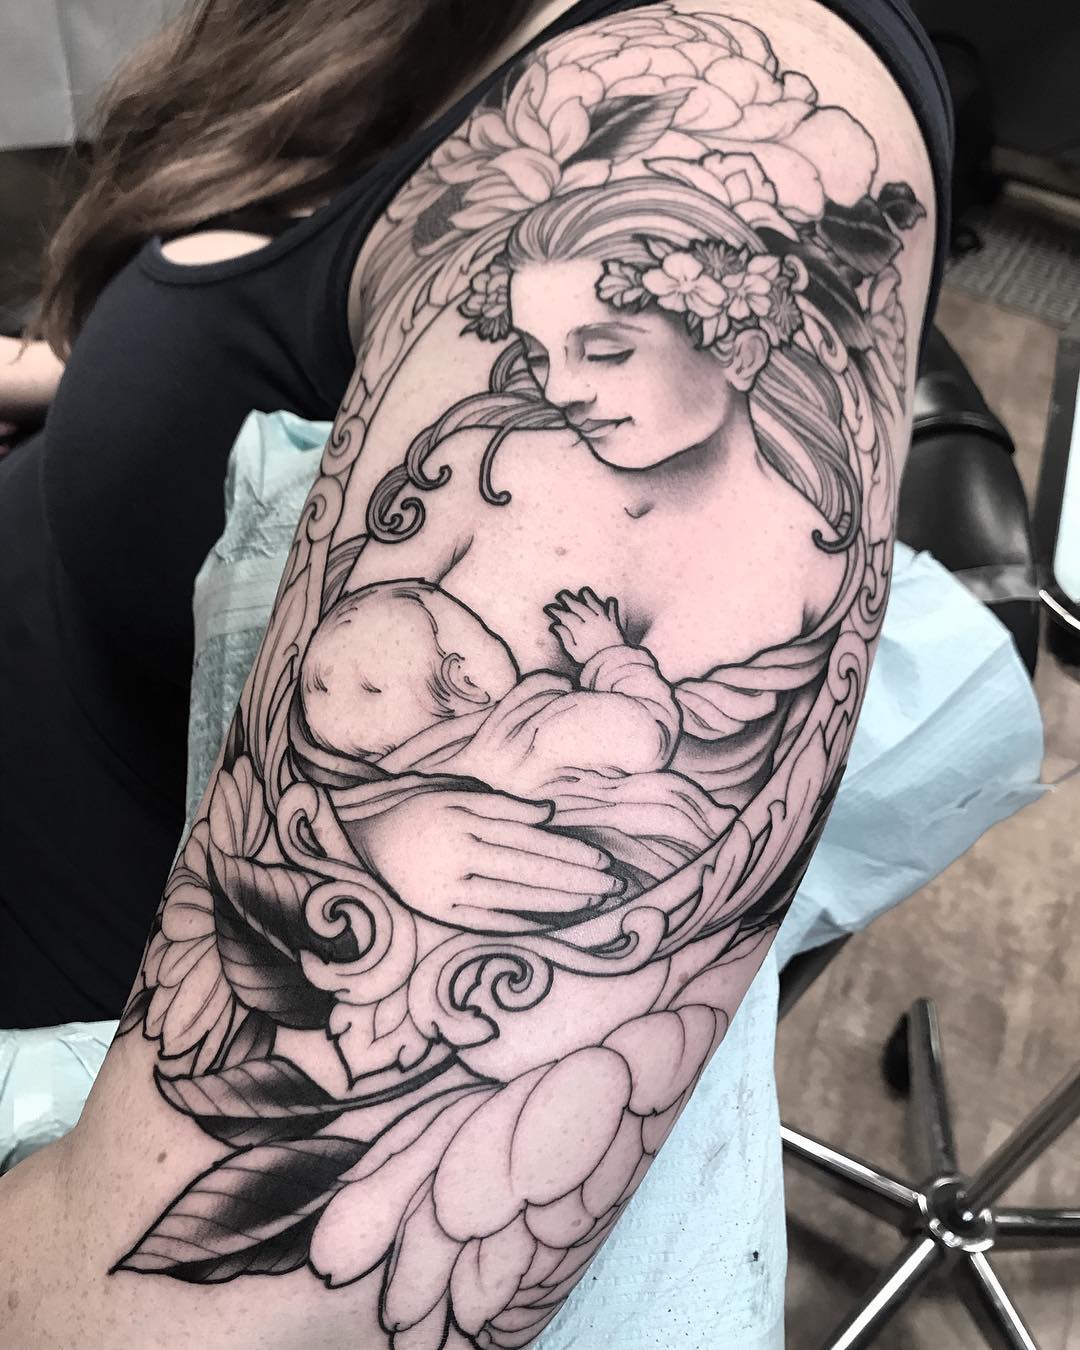 Tattoo of a mother carrying her child